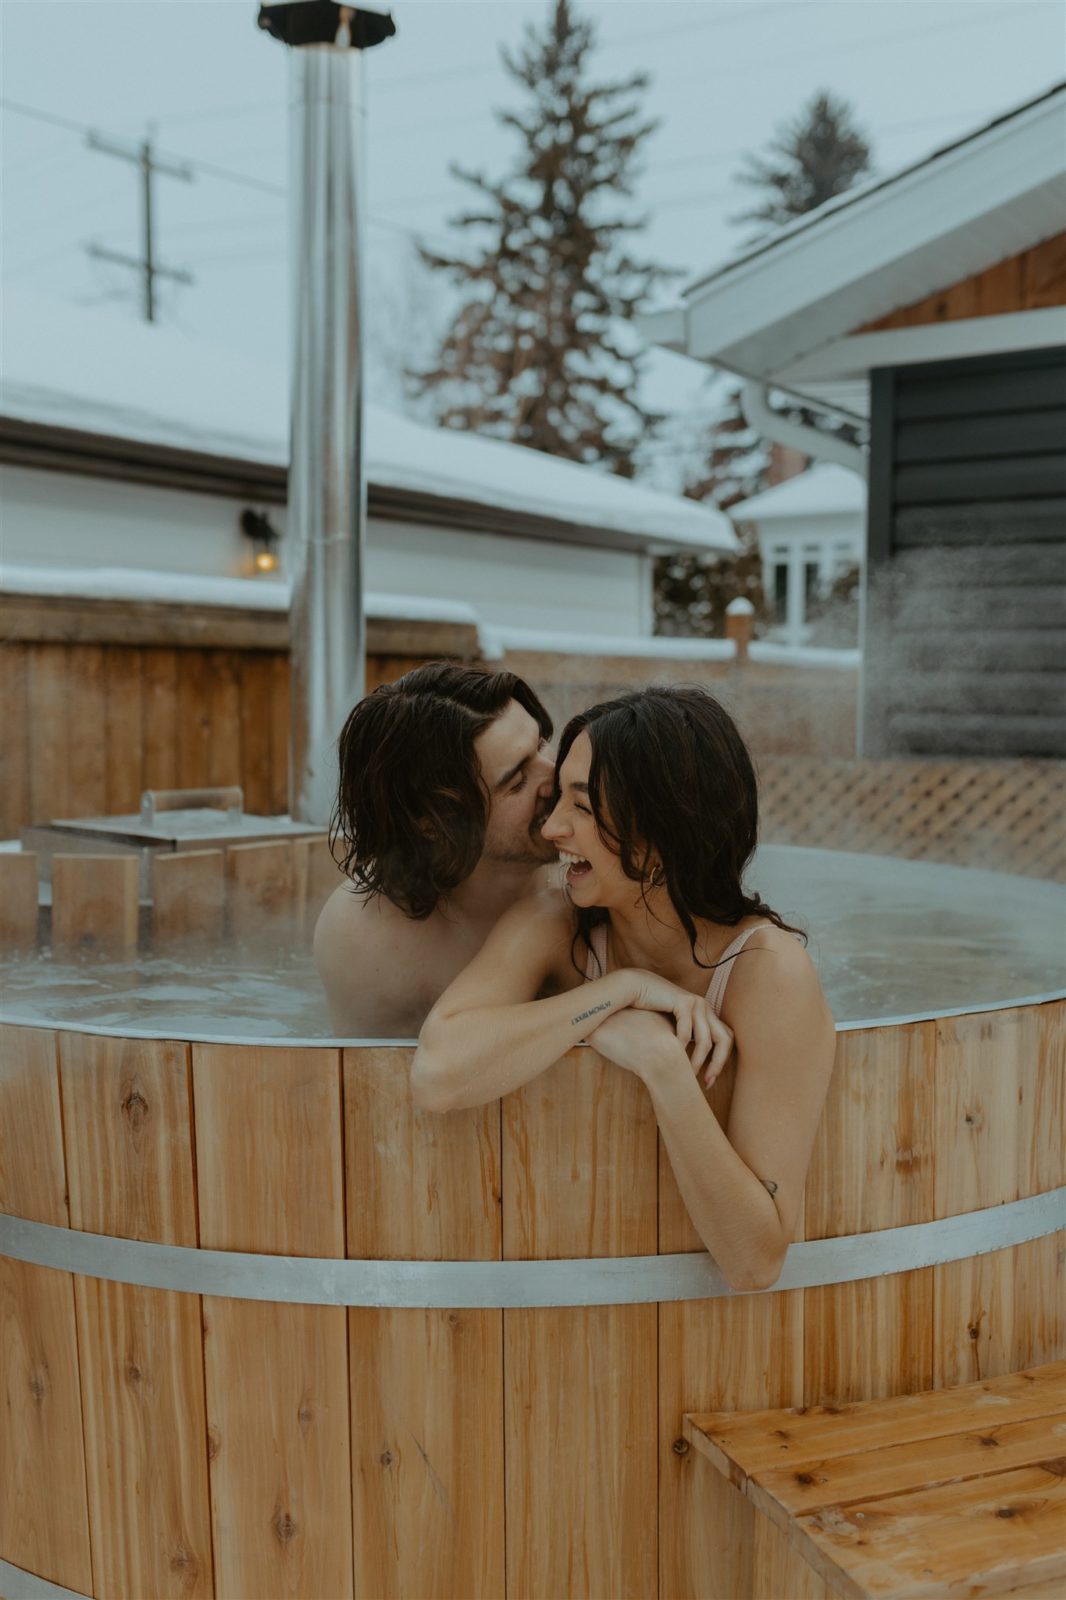 Hot tub photo session in Alberta at winter time, unique engagement session activity